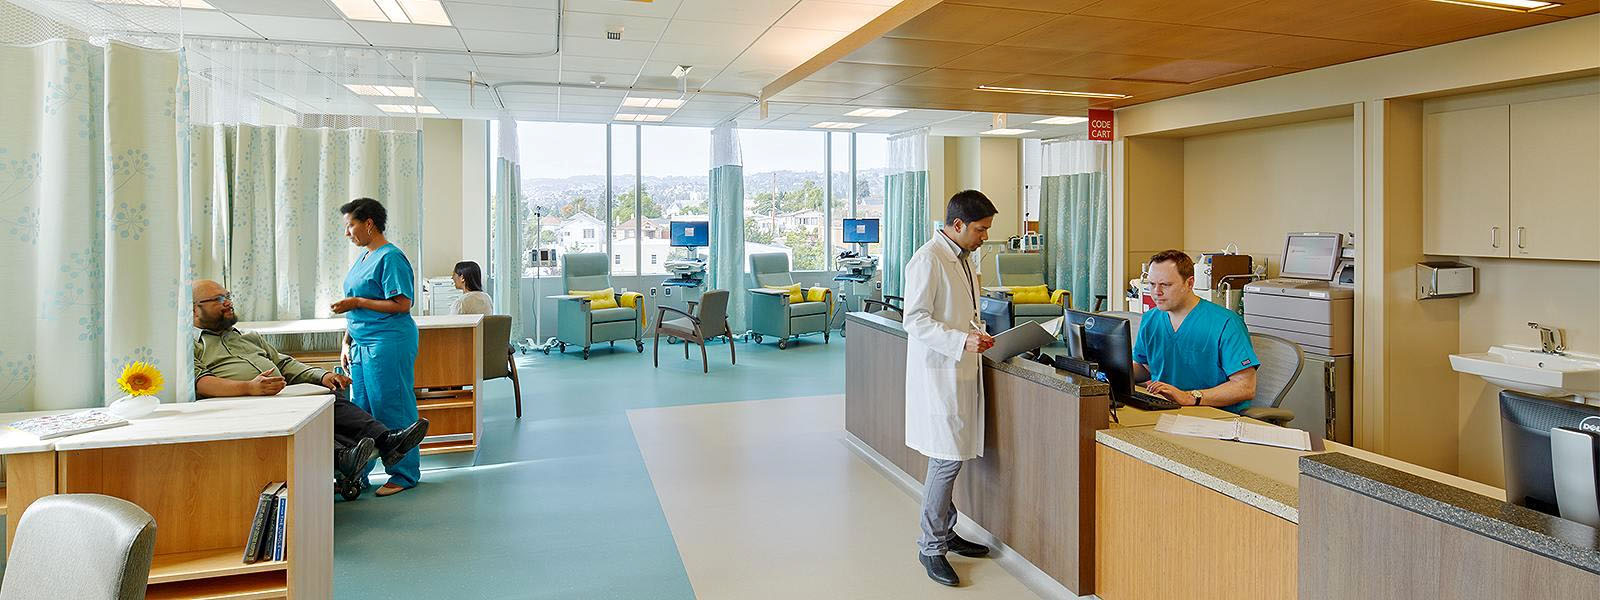 Benefits of Securing Your Healthcare Facilities